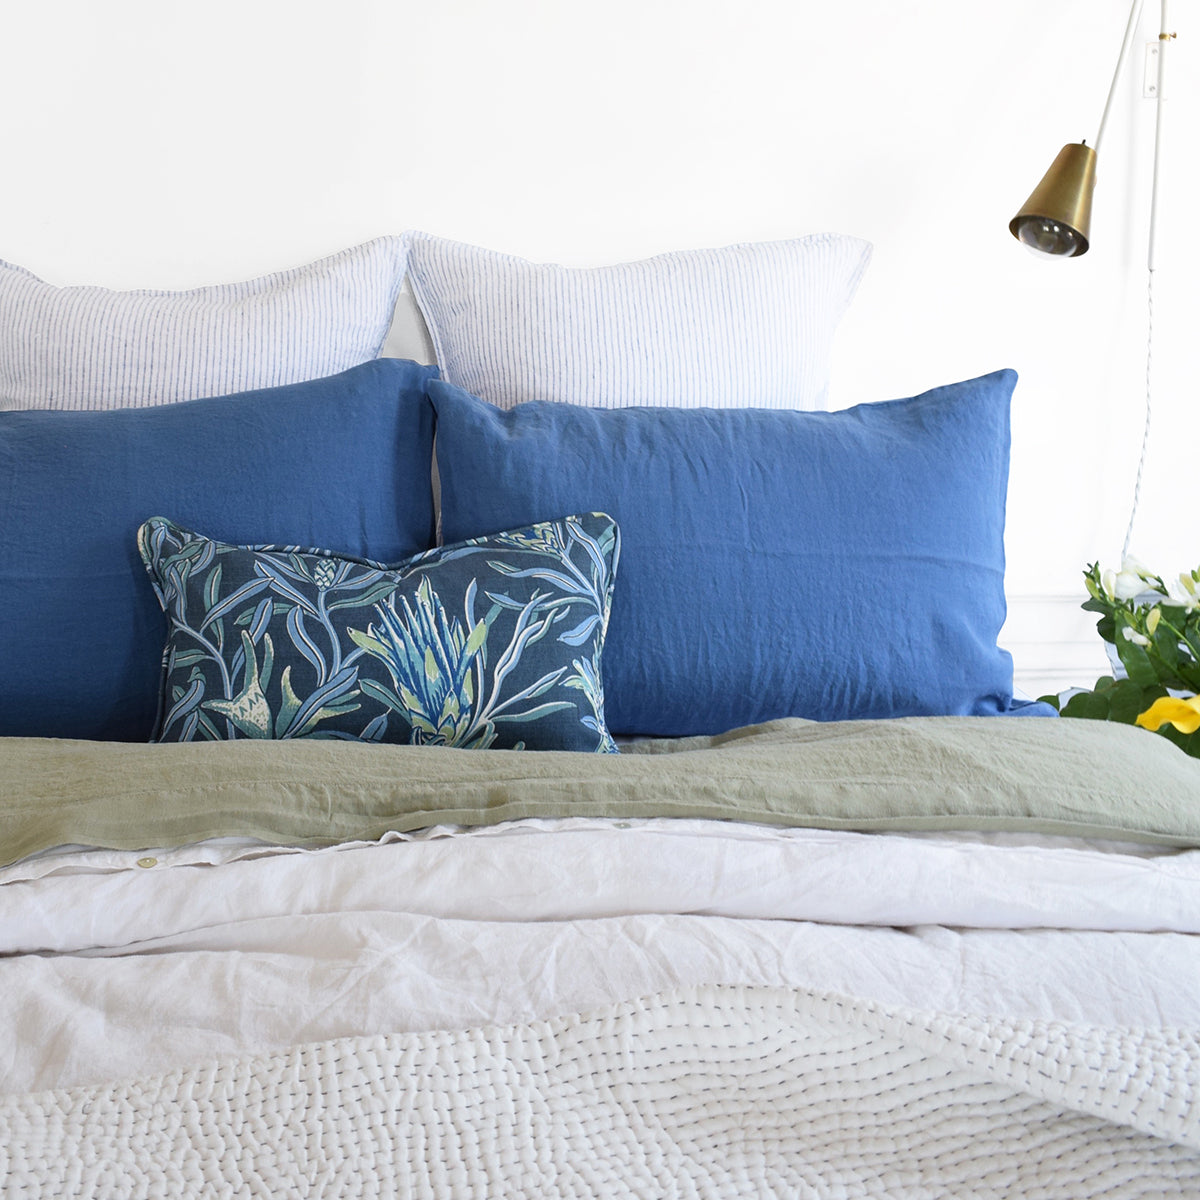 Linge Particulier Atlantic Blue Standard Linen Pillowcase Sham with Utopia Goods pillow and green linen sheet for a colorful linen bedding look in electric blue - Collyer&#39;s Mansion